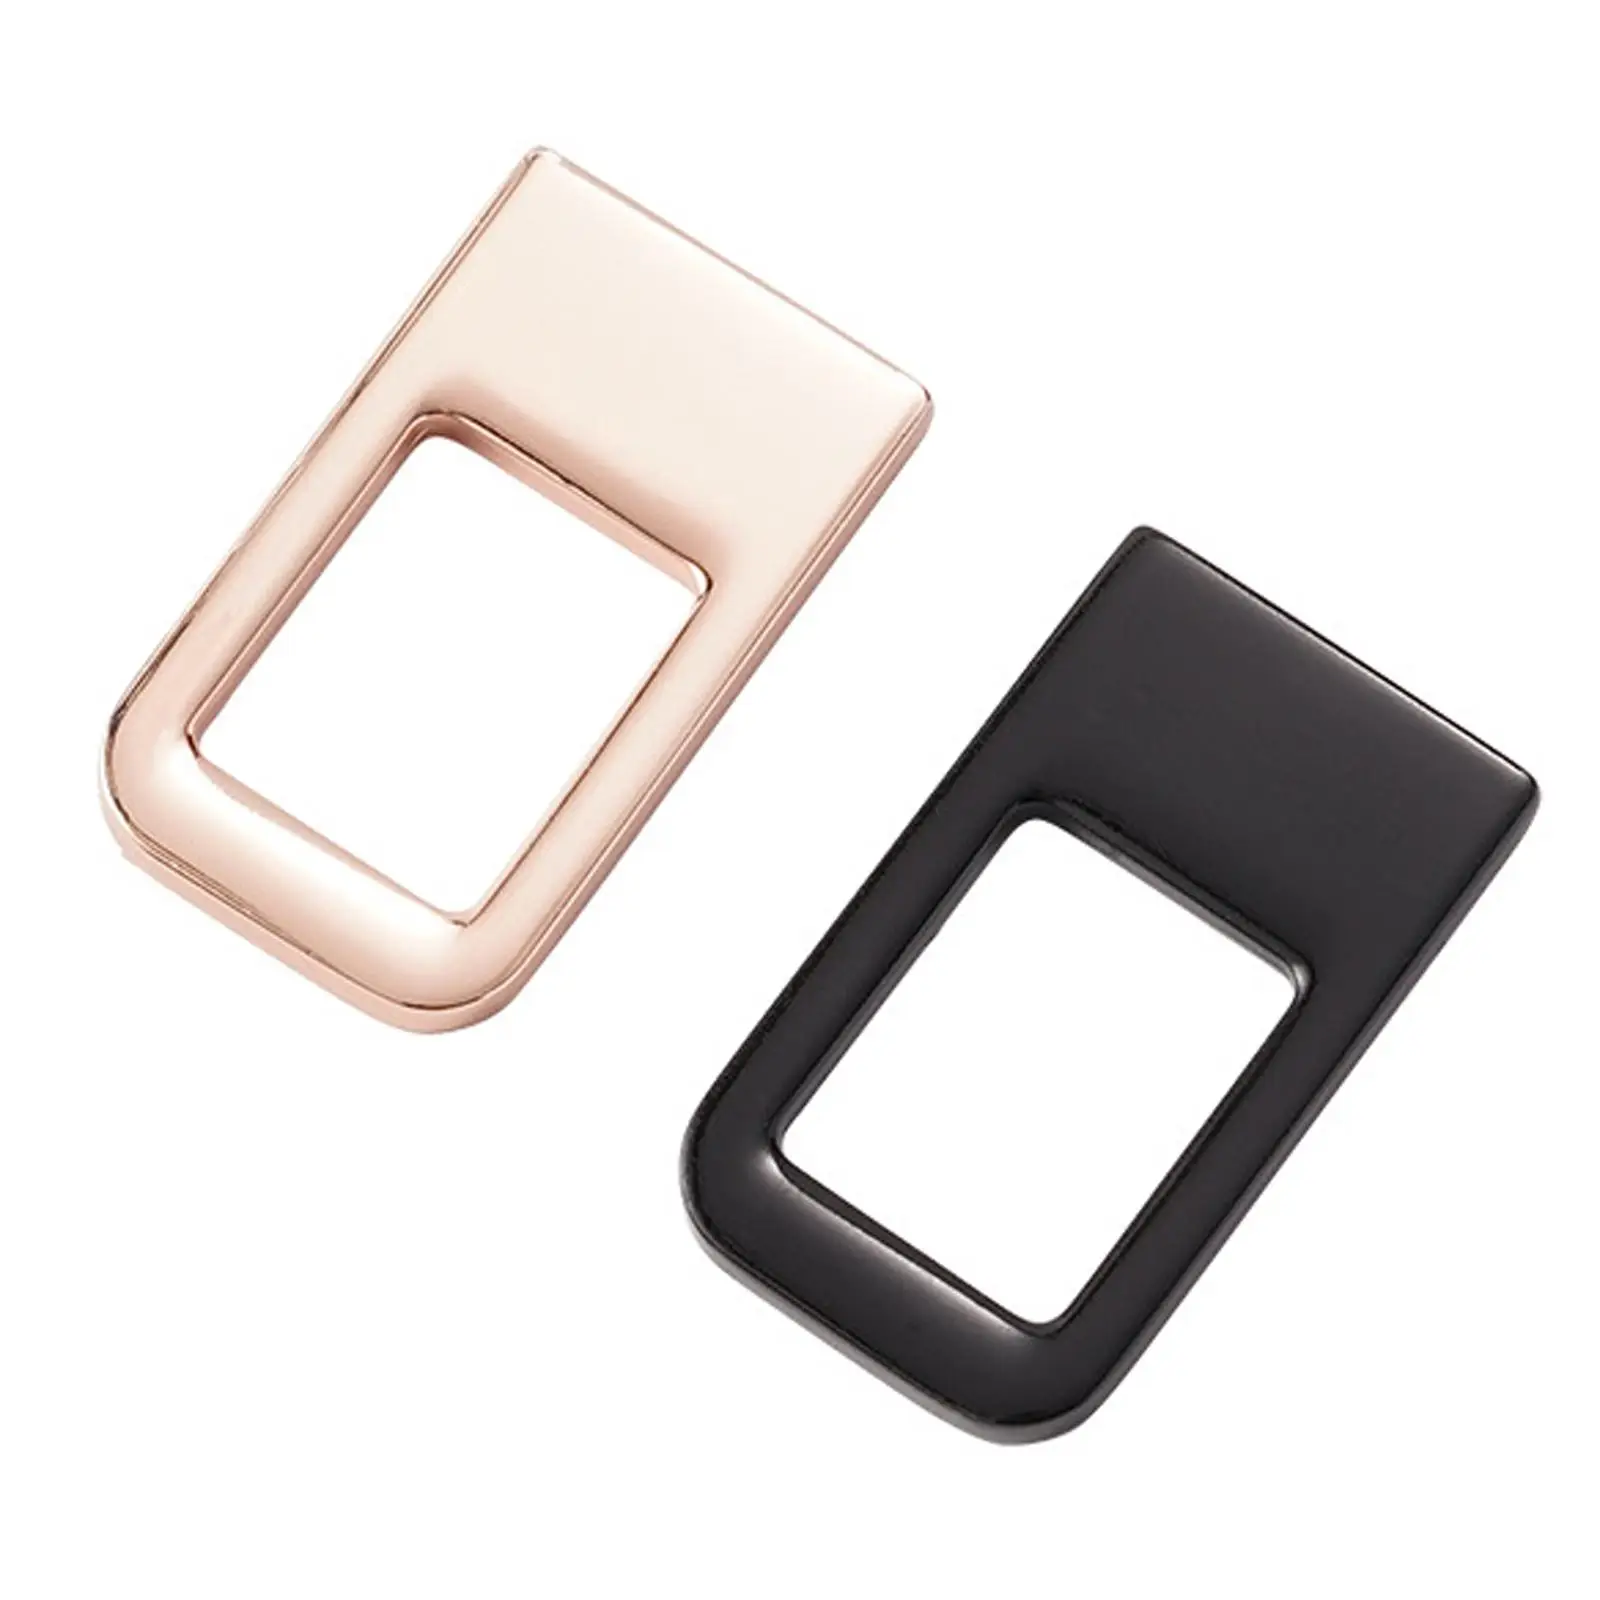 Car Safety Seat Belt Buckle Clip Spare Parts Replaces Metal Insert Card Hidden Seat Belt Buckle Clip for Byd Yuan Plus